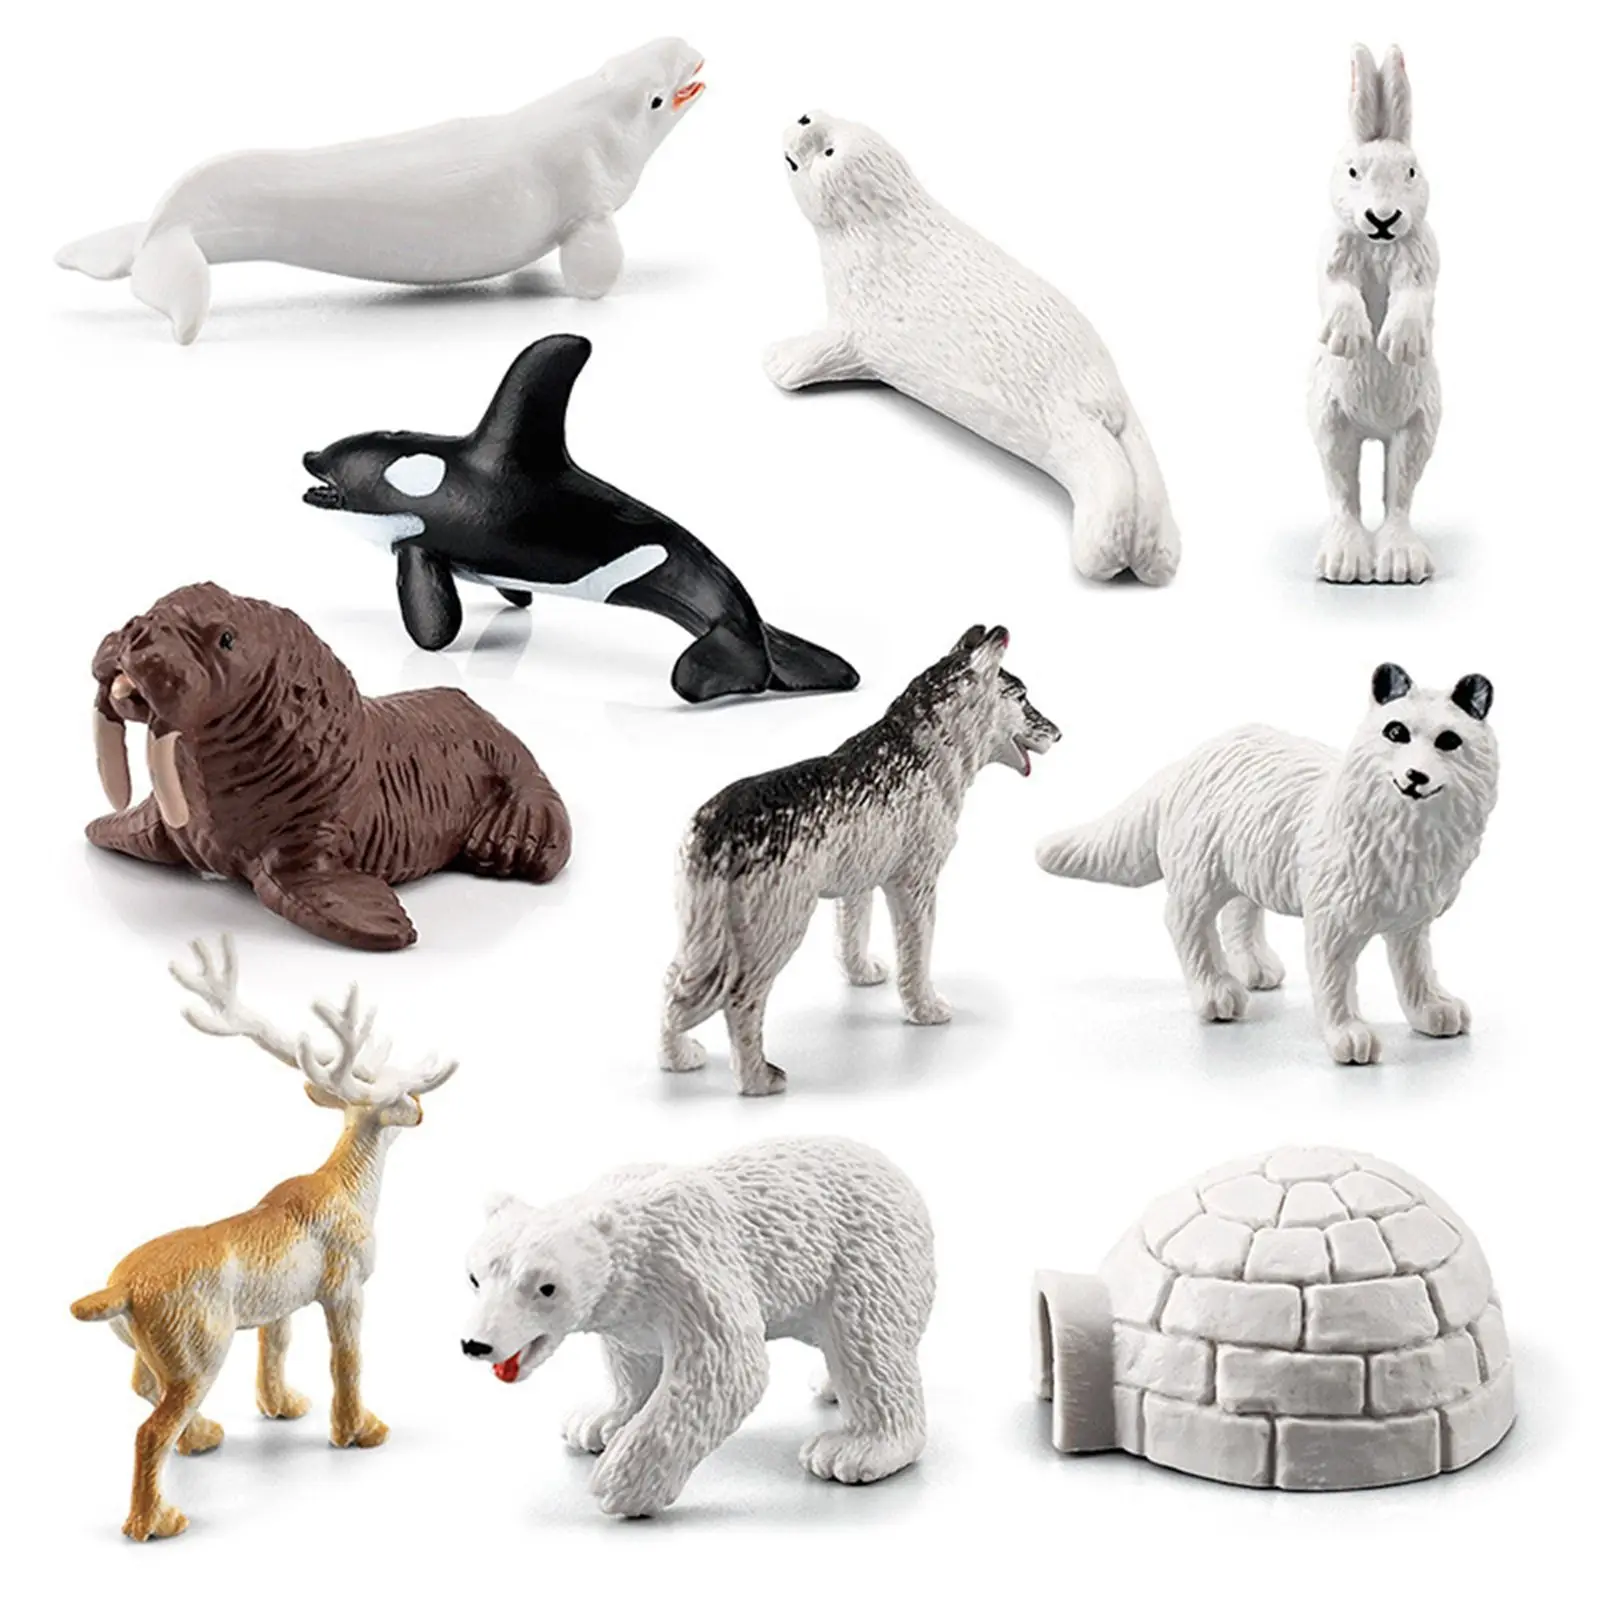 10x Lifelike Arctic Animal Model Display Props Mini Figurines Models Toys for New Year Birthday Christmas Party